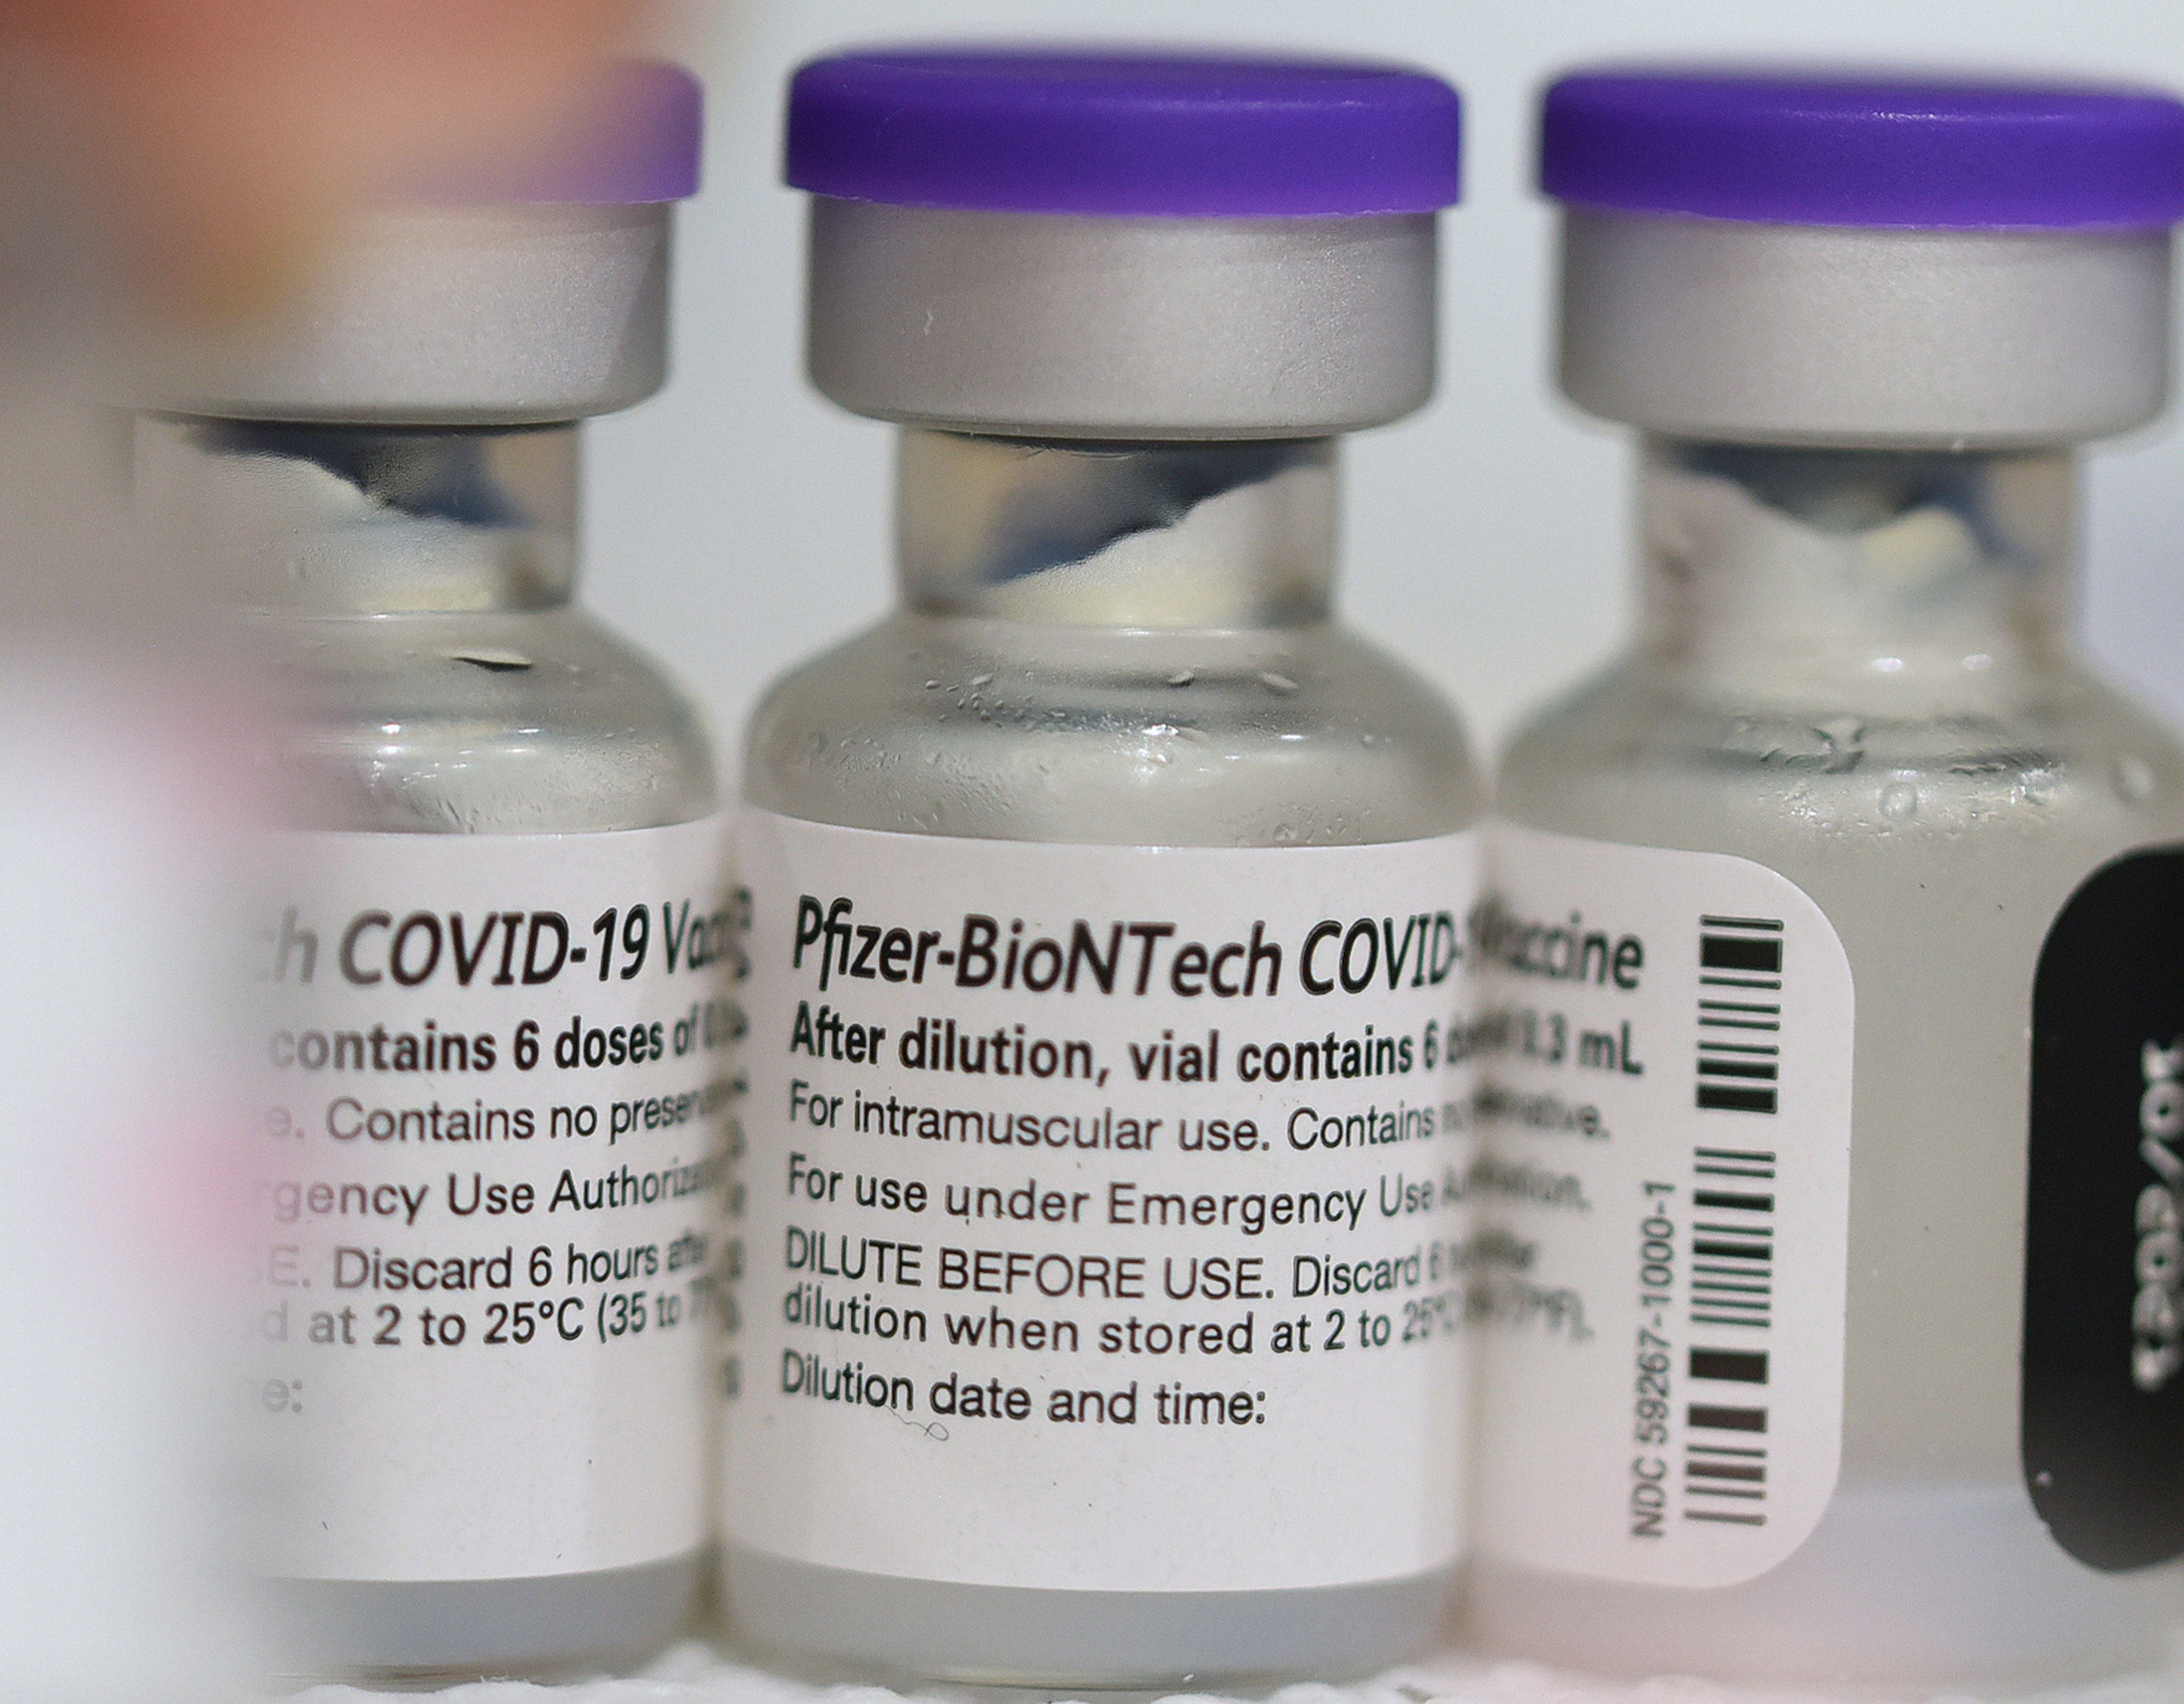 Vials of the Pfizer Covid-19 vaccine are seen at a vaccination clinic in Winter Springs, Florida, on September 11.